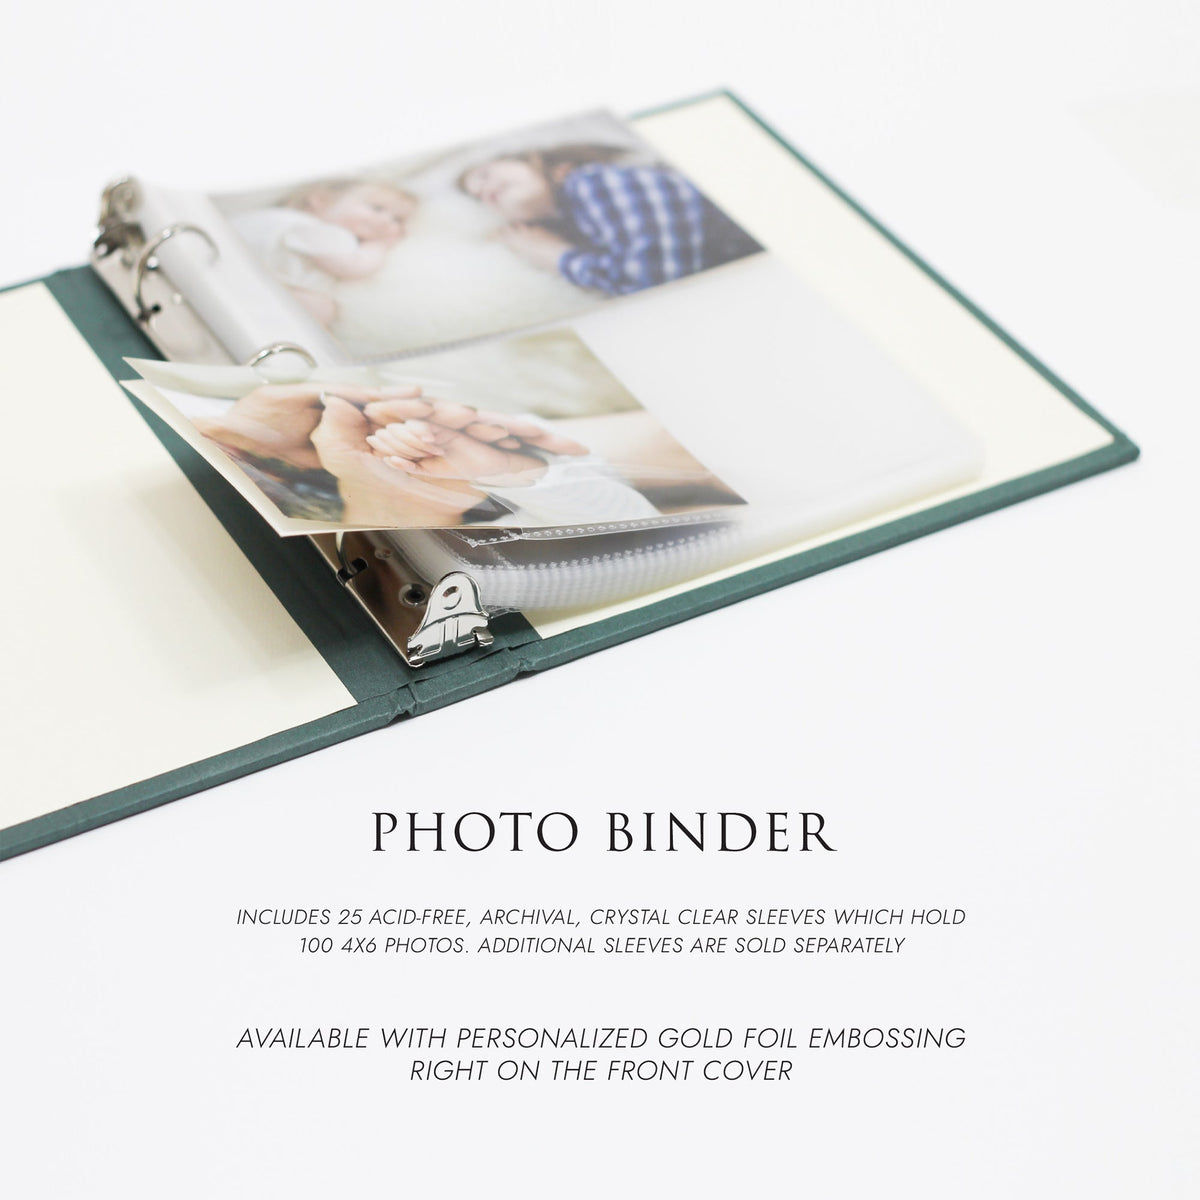 Medium Photo Binder For 4x6 Photos | Cover: Mango Cotton | Available Personalized